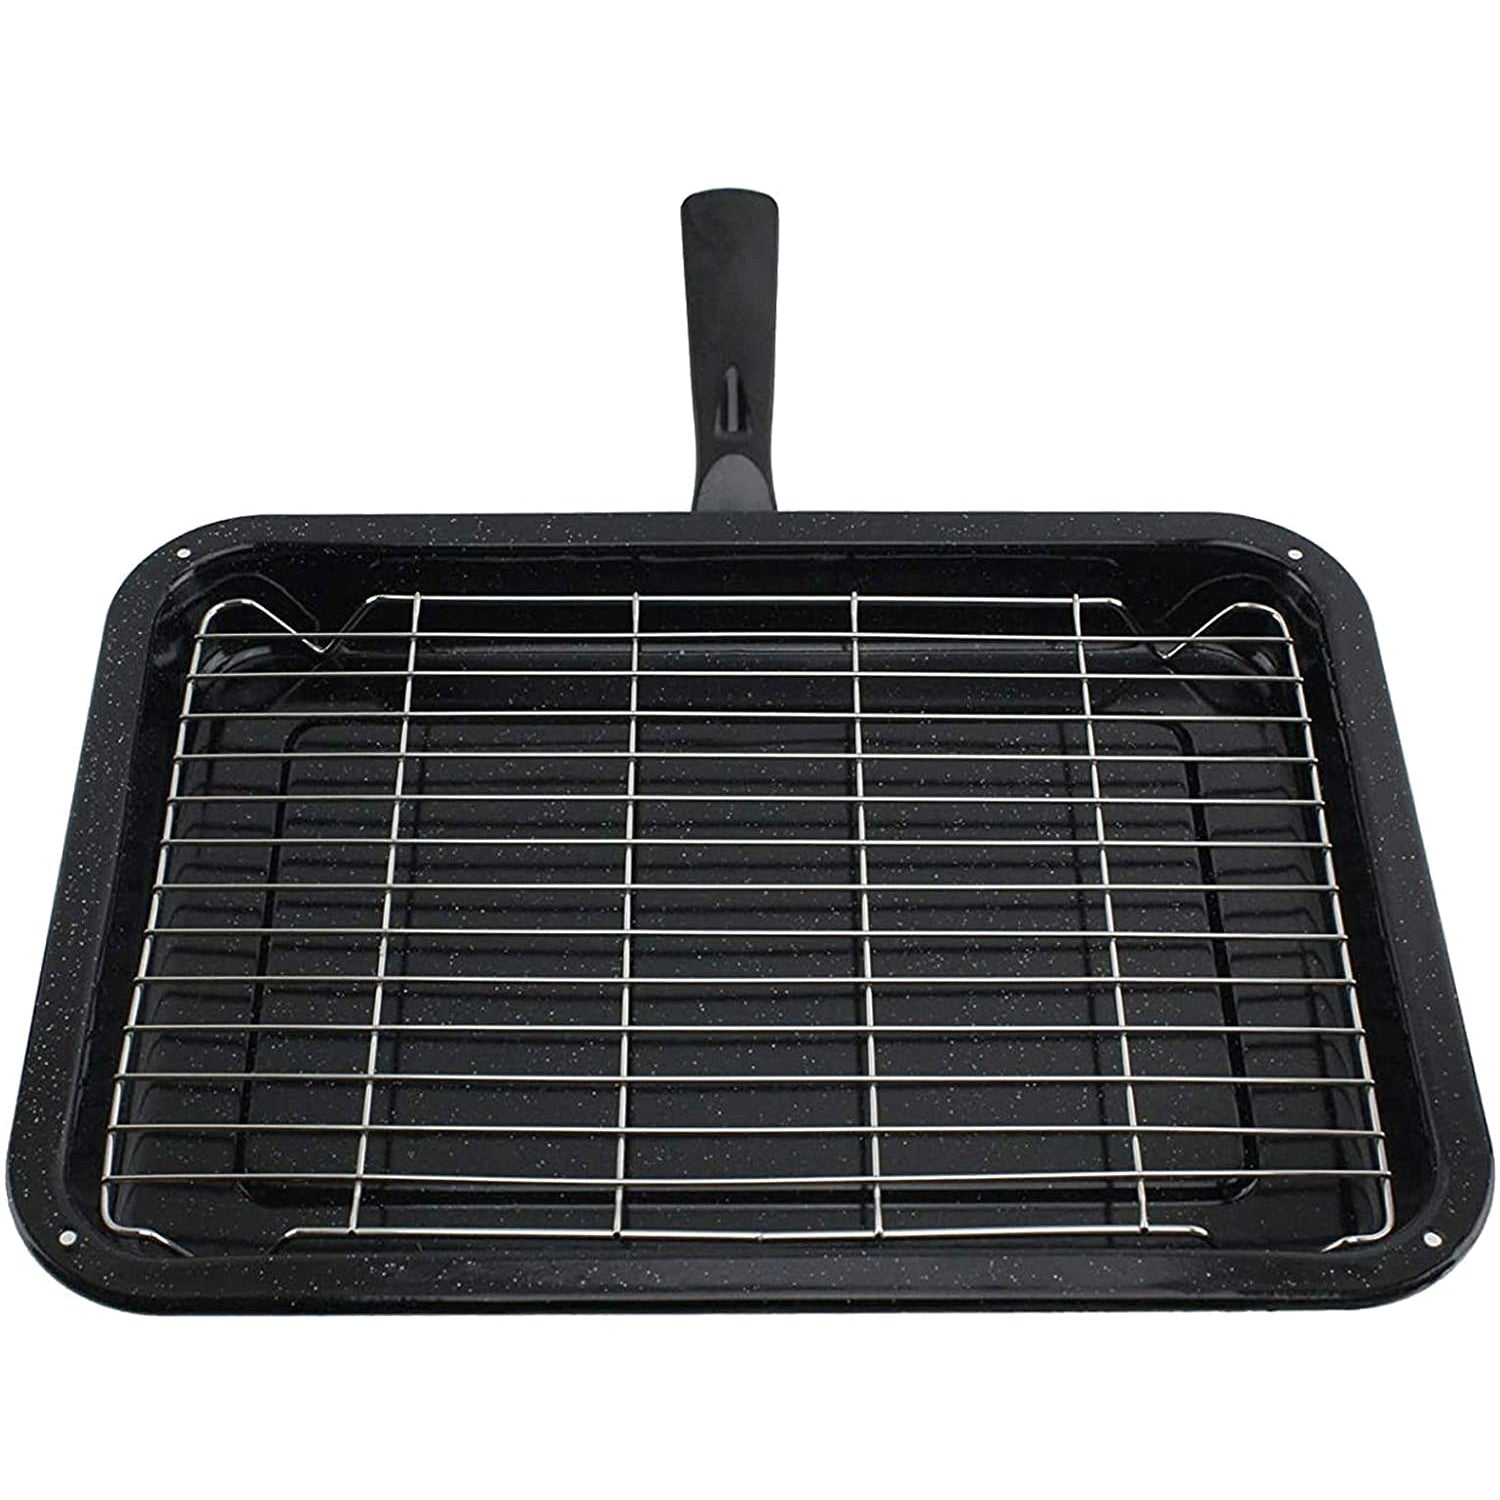 Small Grill Pan + Rack and Detachable Handle for NEW WORLD Oven Cooker